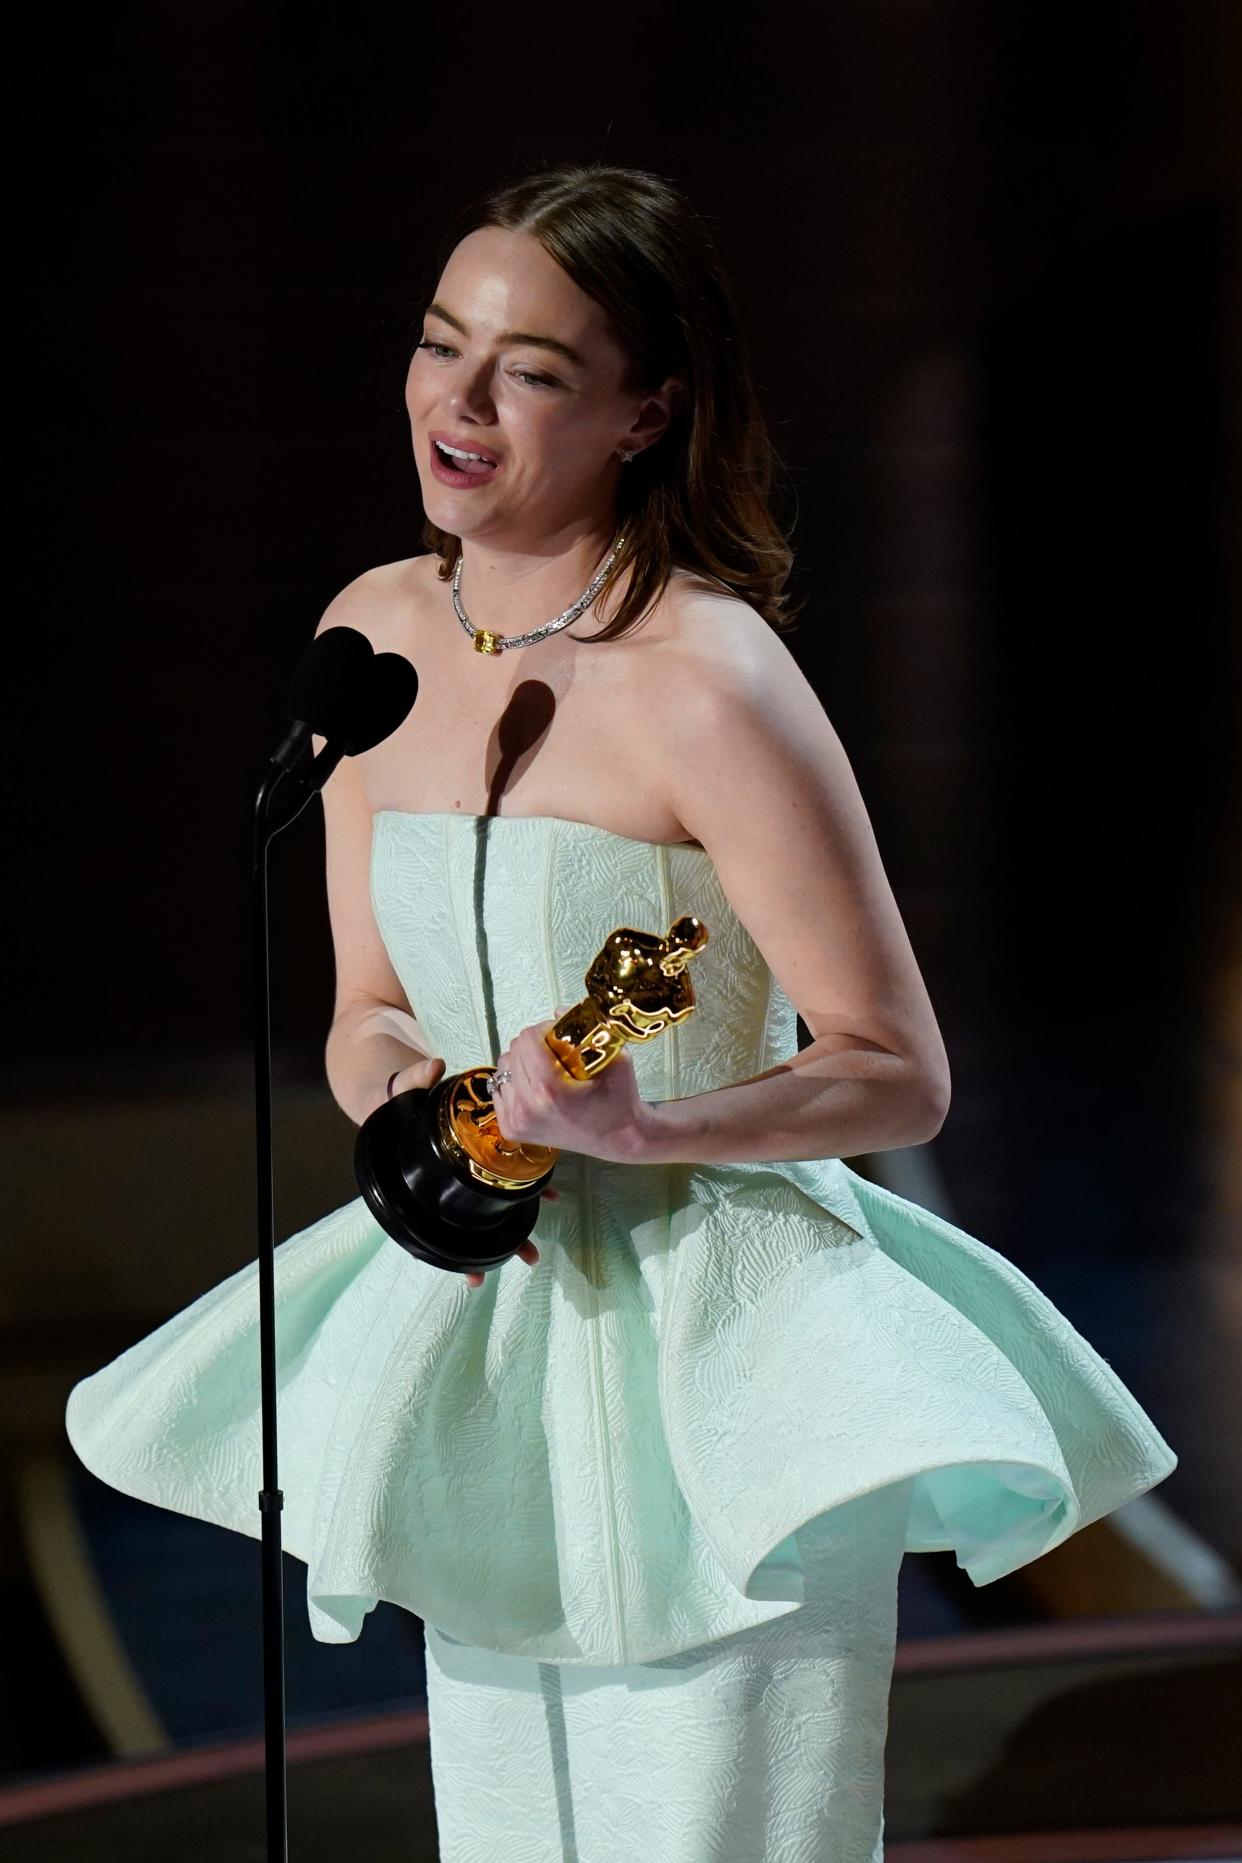 Emma Stone accepts the award for best actress in a leading role for her role in "Poor Things" during the 96th Oscars at the Dolby Theatre at Ovation Hollywood in Los Angeles on Sunday.